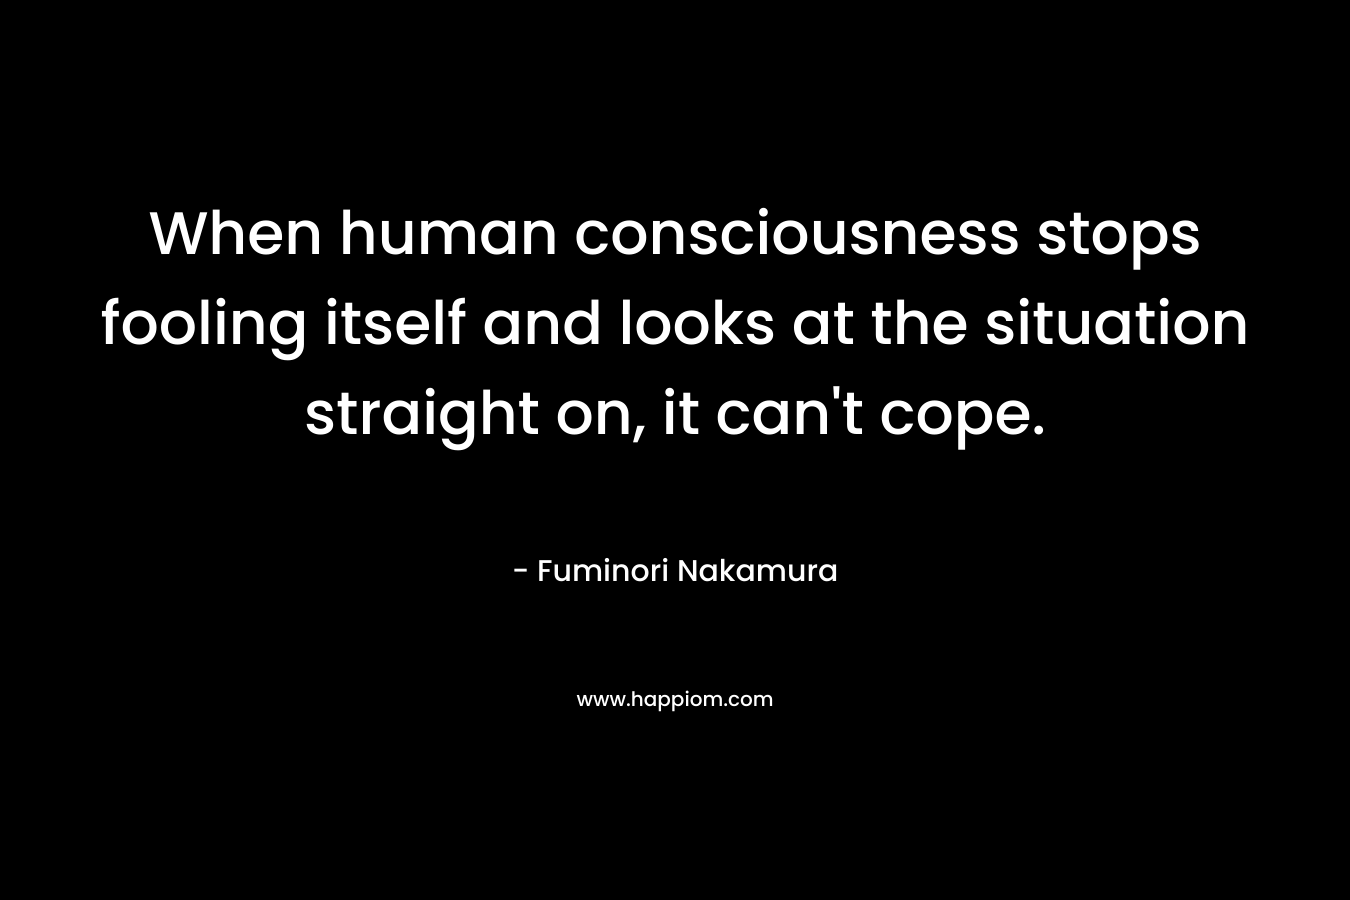 When human consciousness stops fooling itself and looks at the situation straight on, it can't cope.